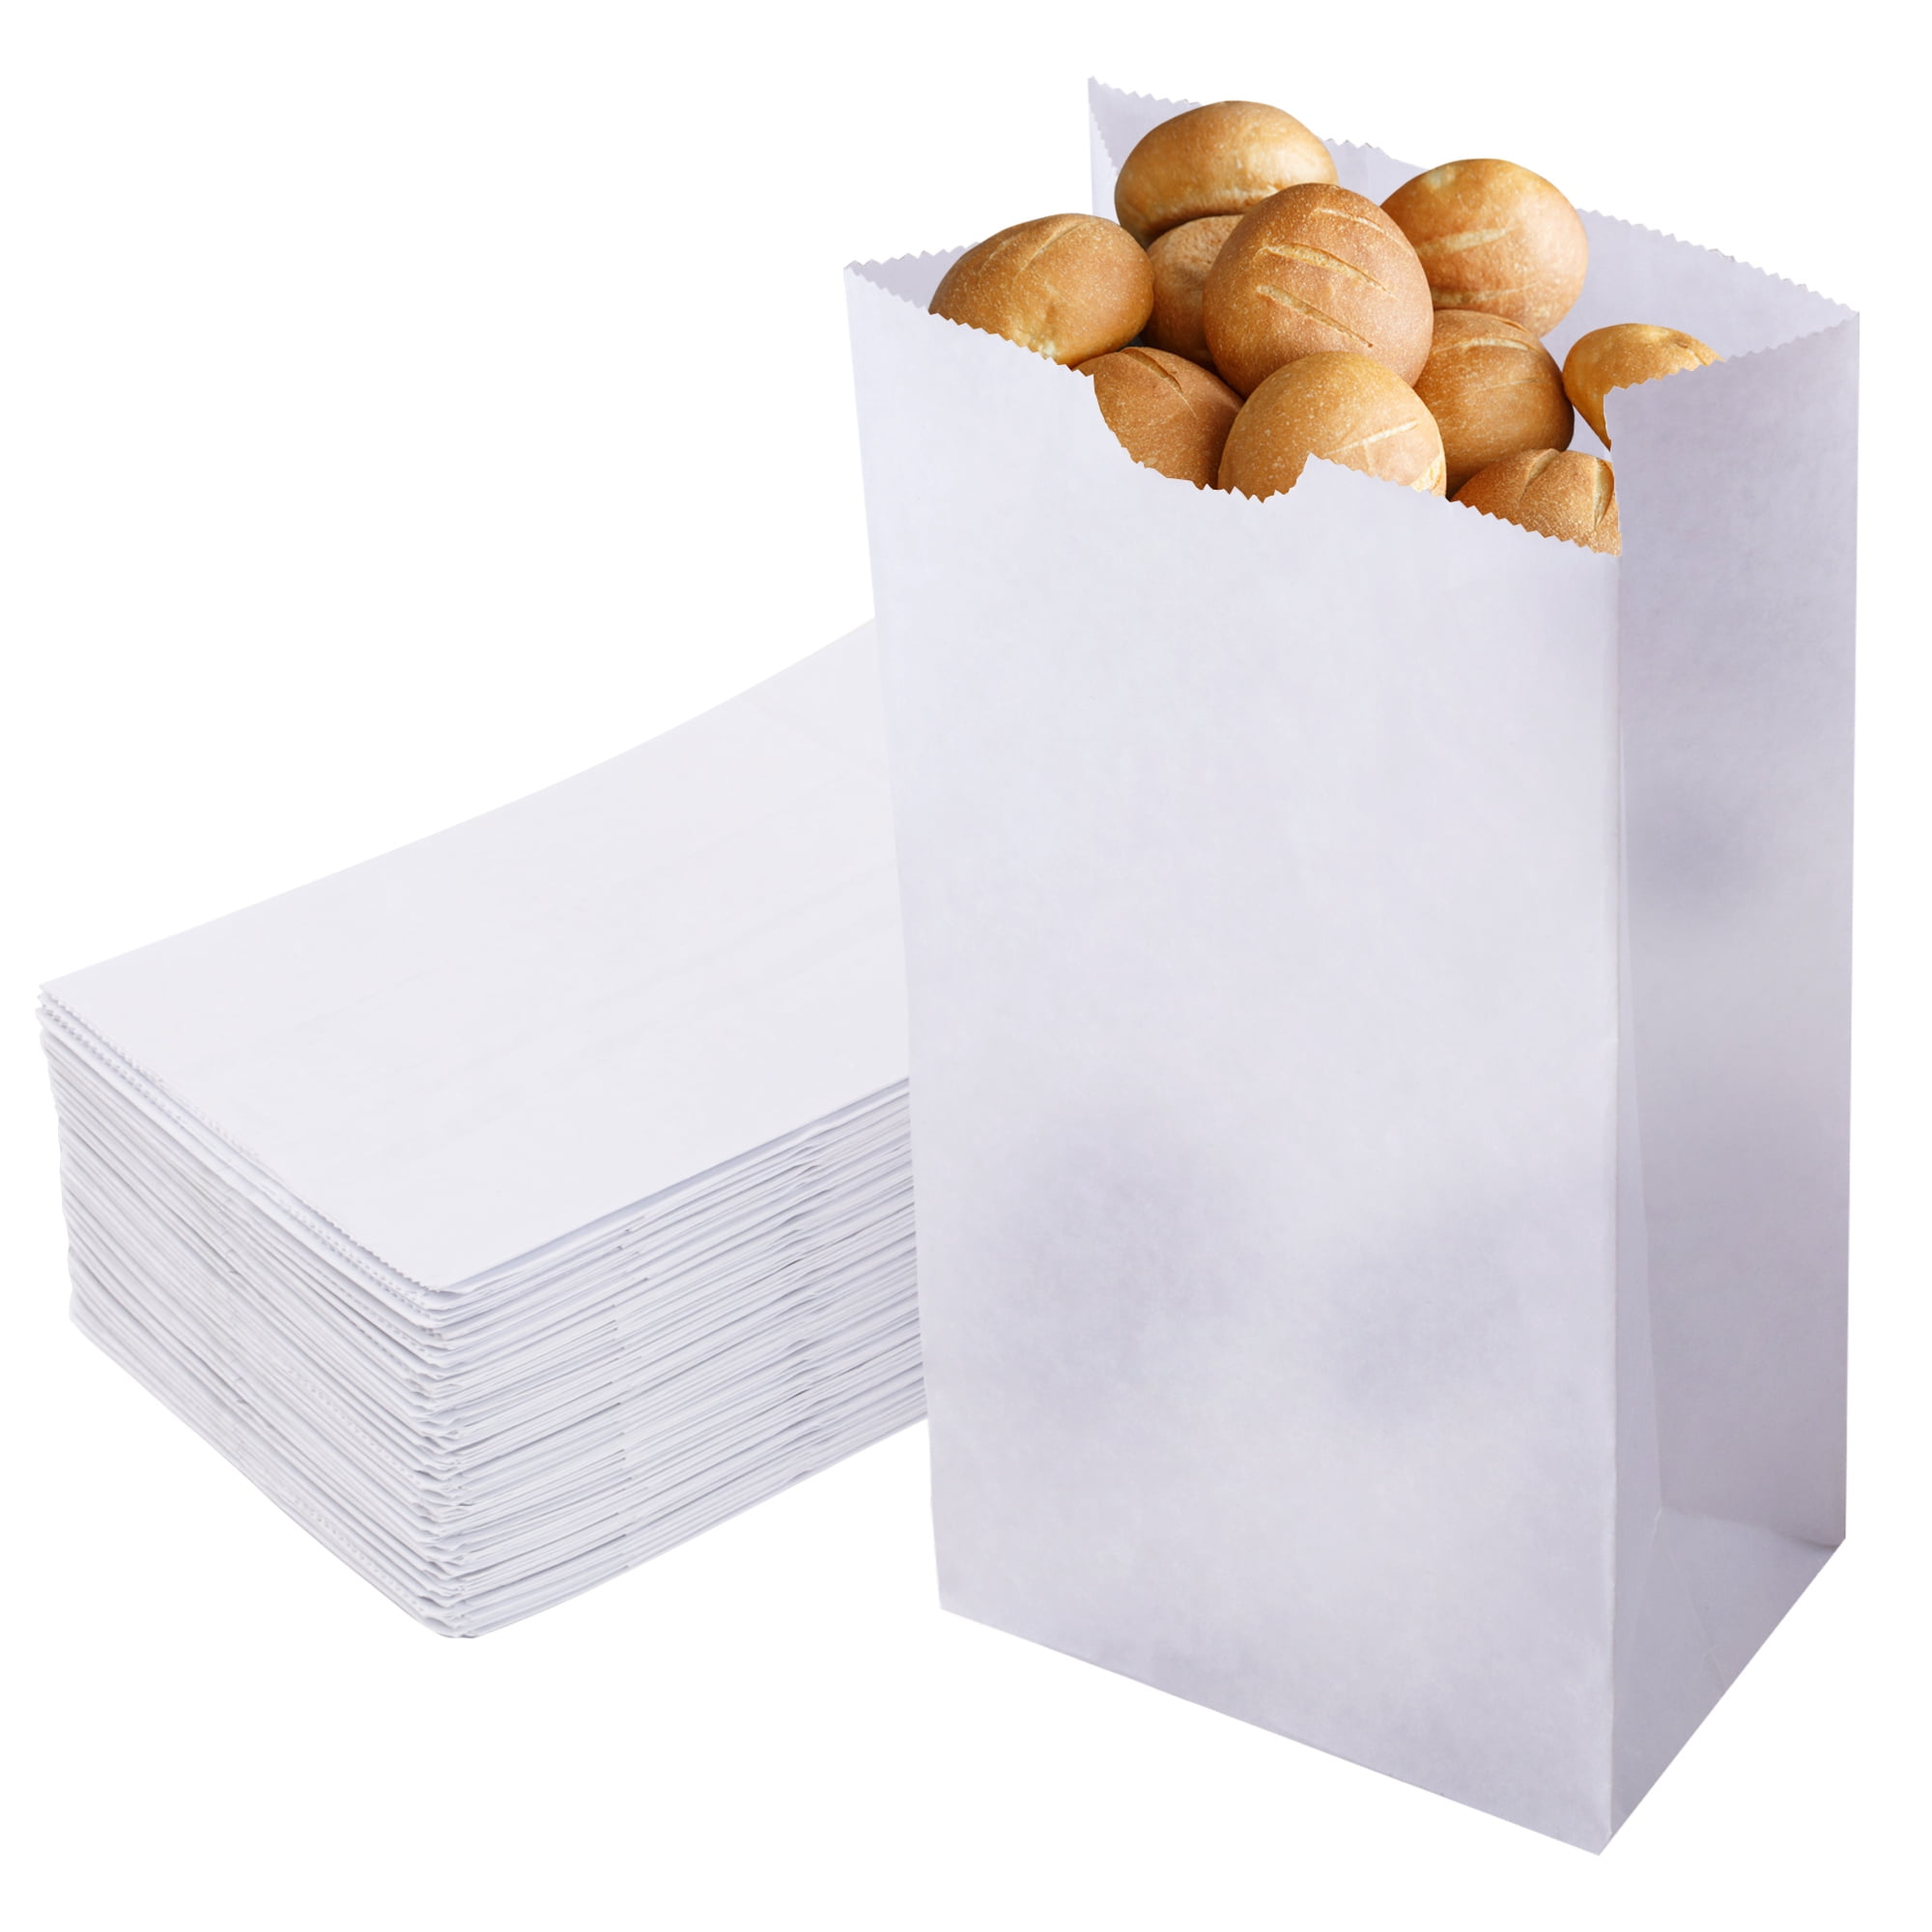 100 Pcs Treat Bags & More Sandwich Bags Quality Food-Grade Kraft Paper Bags That Can Hold Up to 6.6 lbs Brown Paper Lunch Bag Snack Bags Customizable Brown Paper Bags & Great as Favor Bags 